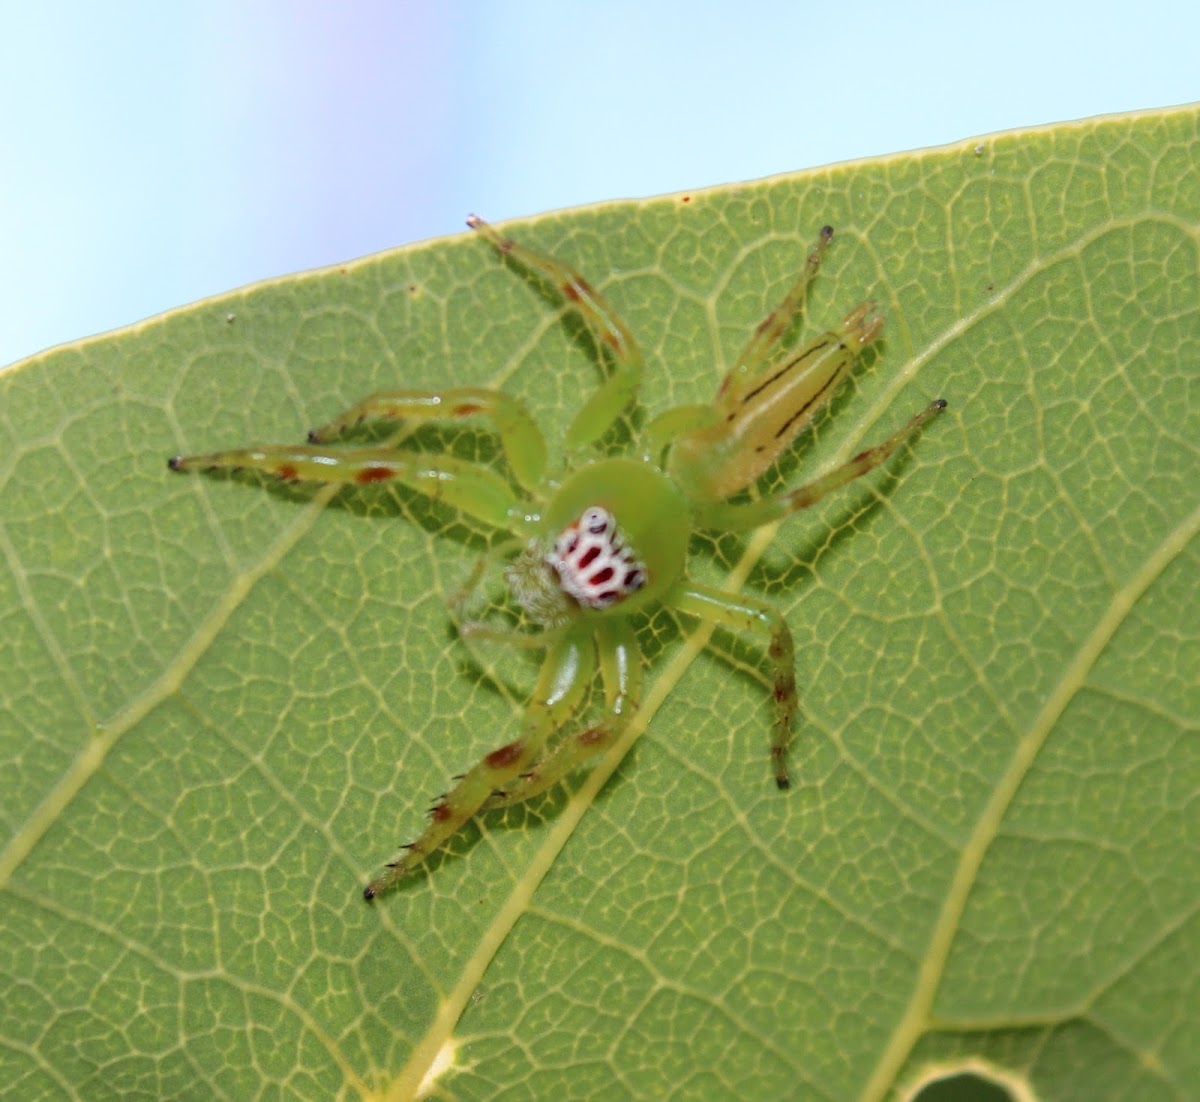 Green Jumping Spider (female)